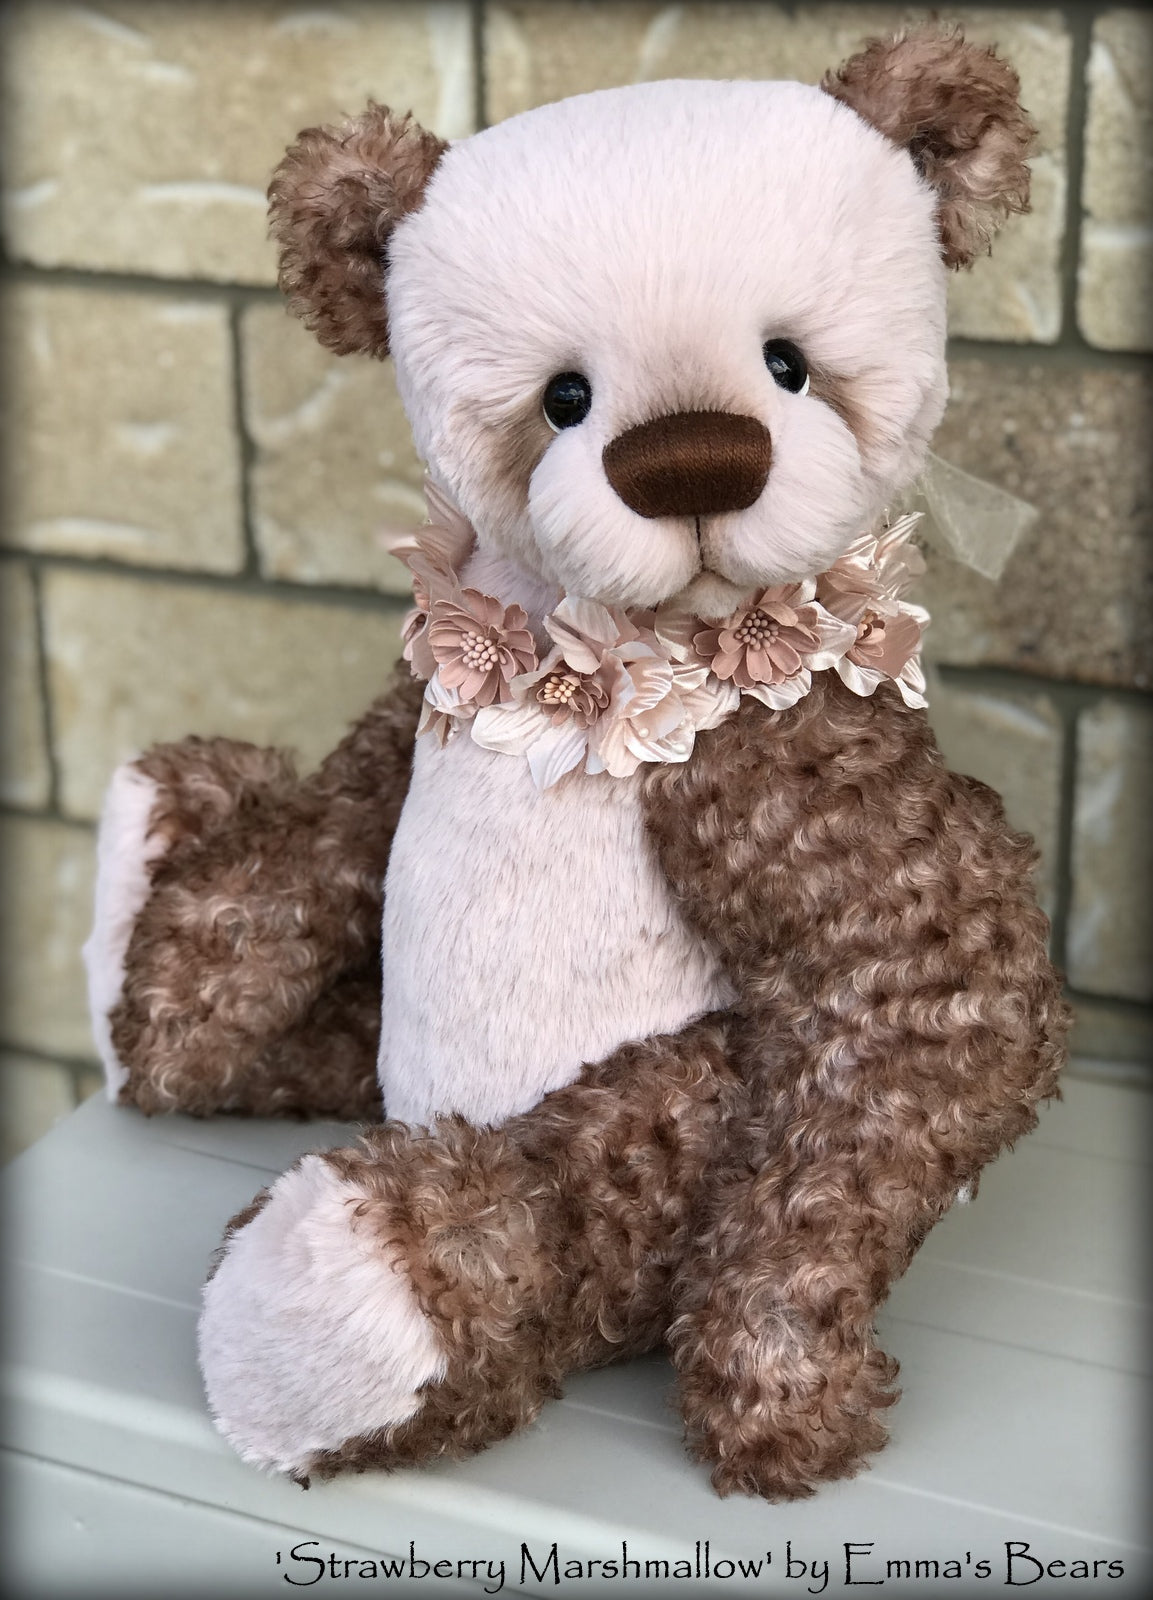 Strawberry Marshmallow - 19" Kid mohair and faux fur bear by Emma's Bears - OOAK